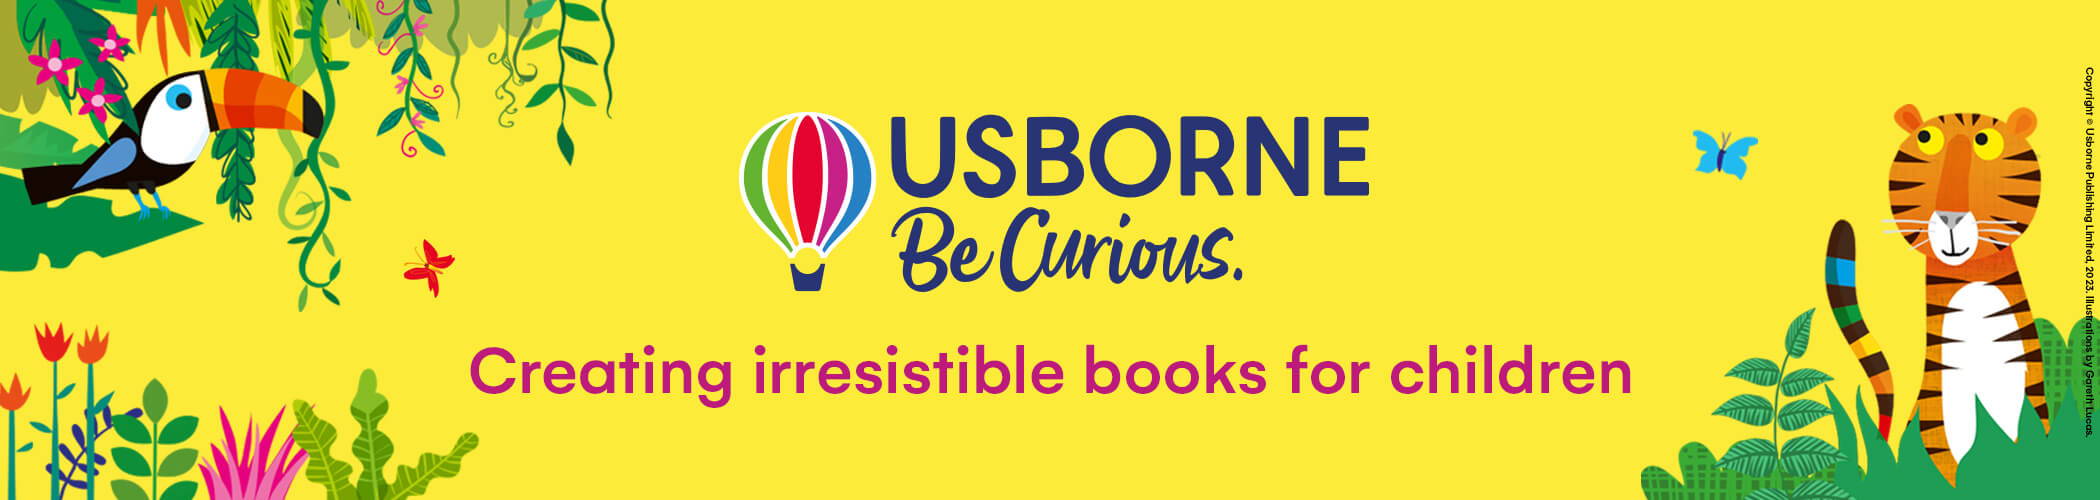 Usborne — Be Curious. Creating irresistible books for children